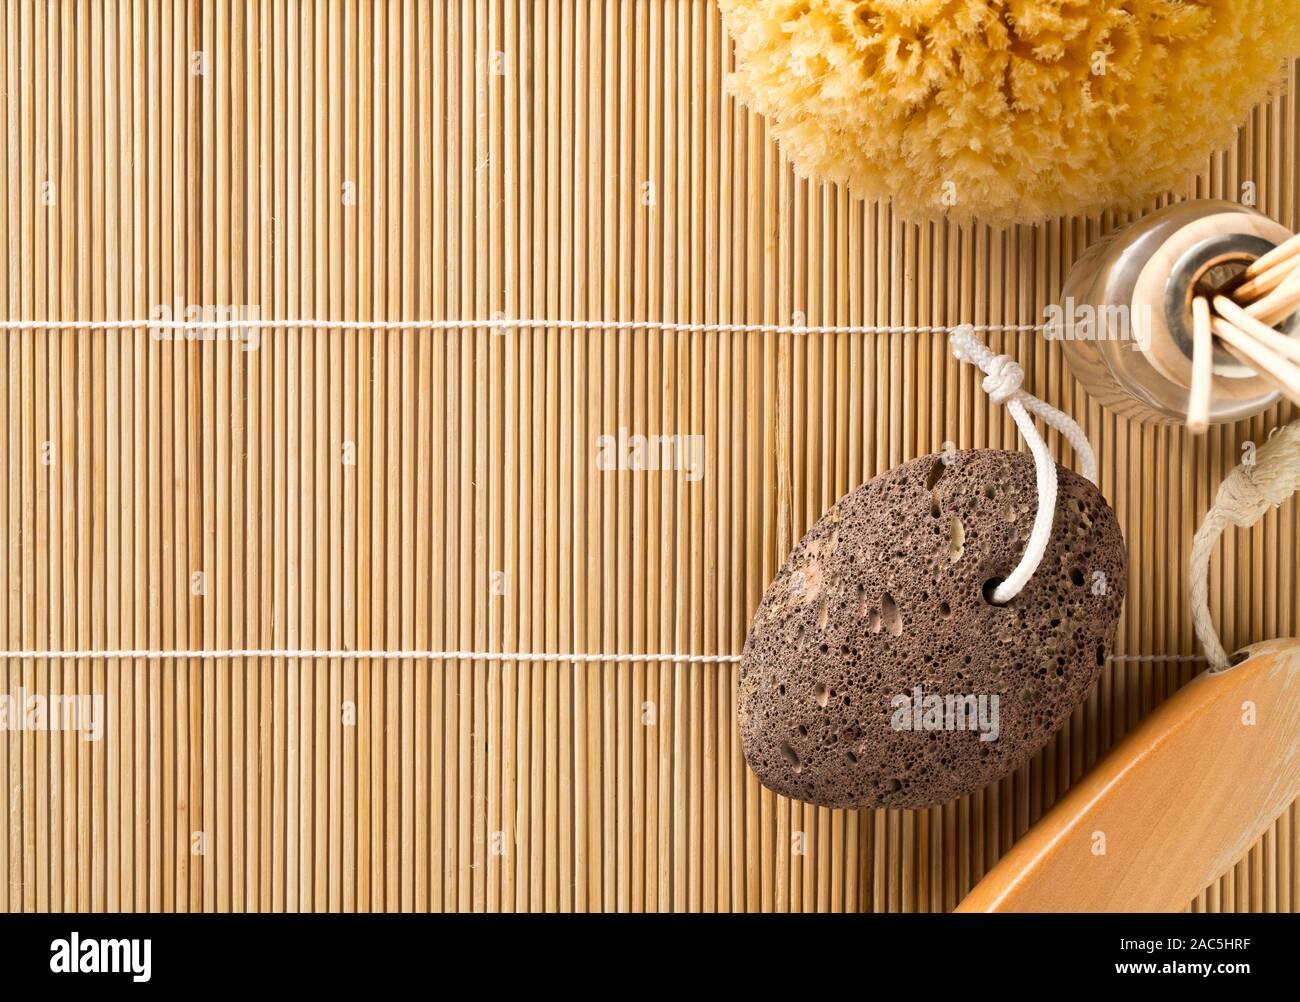 Black lava pumice stone with natural spa or bath utensils used for peeling or callused skin removal on bamboo mat background with copy space Stock Photo